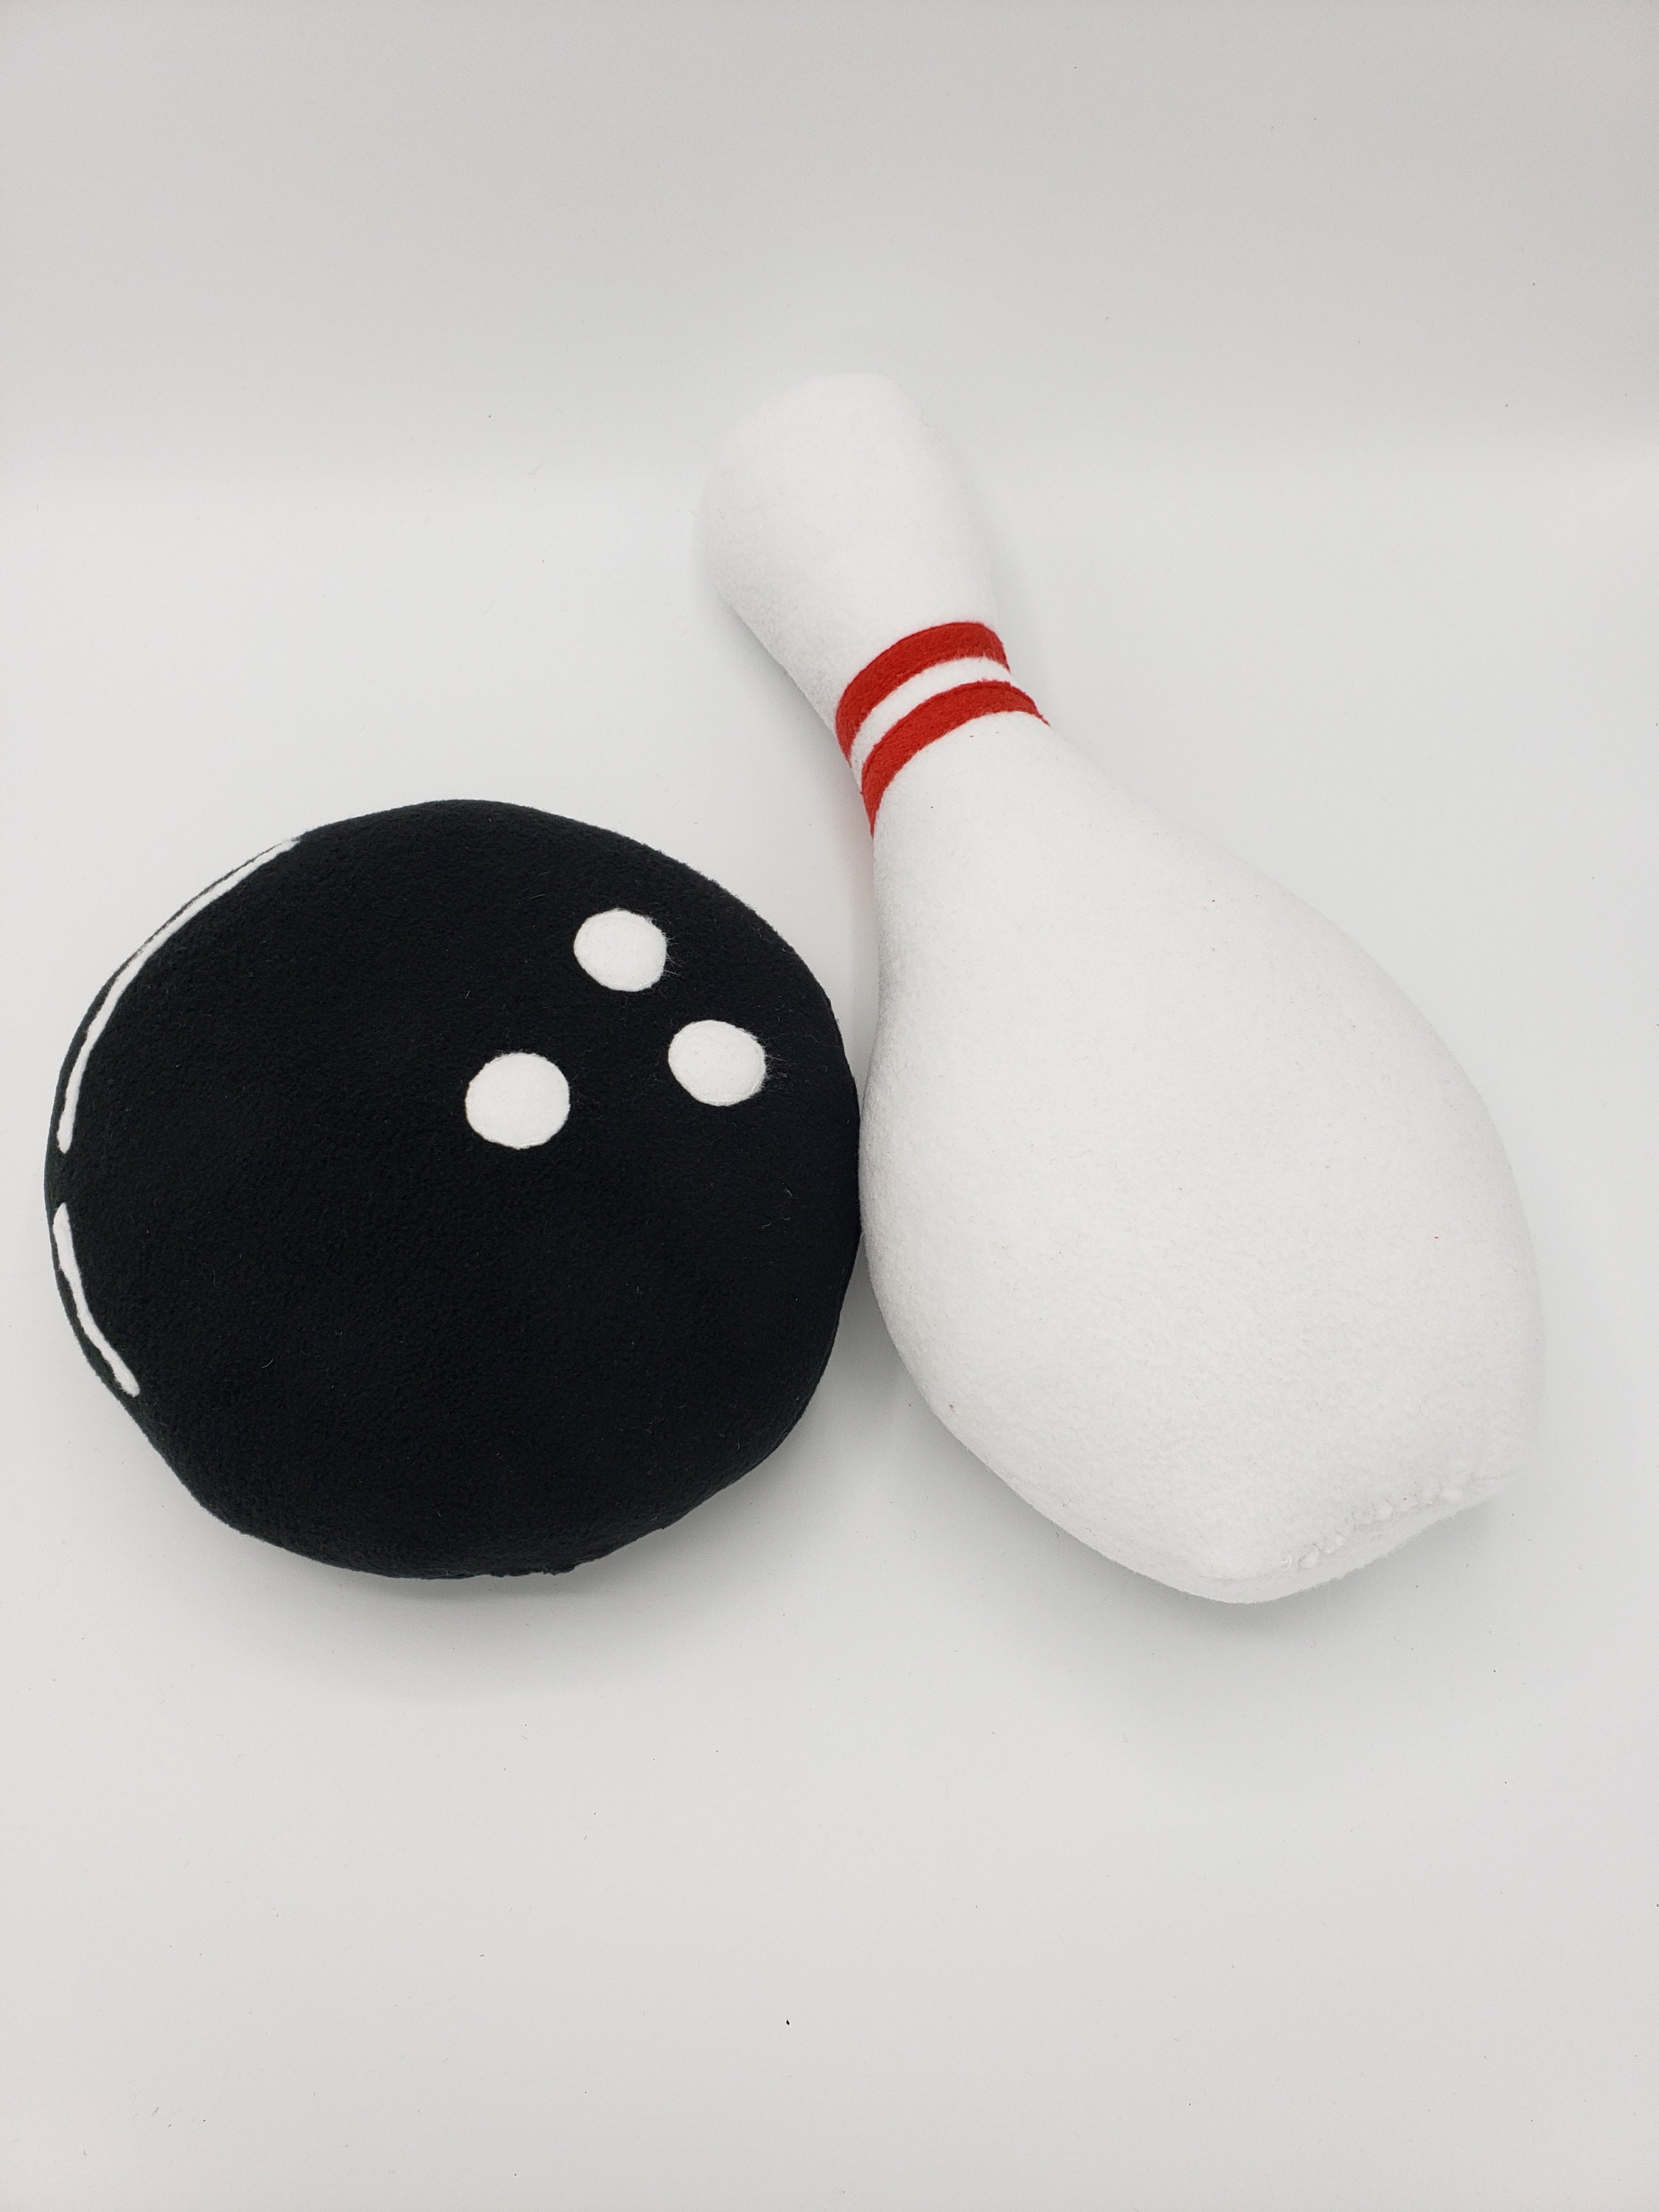 Bowling Ball Shoe And Pin With Your Custom Name Round Pillow